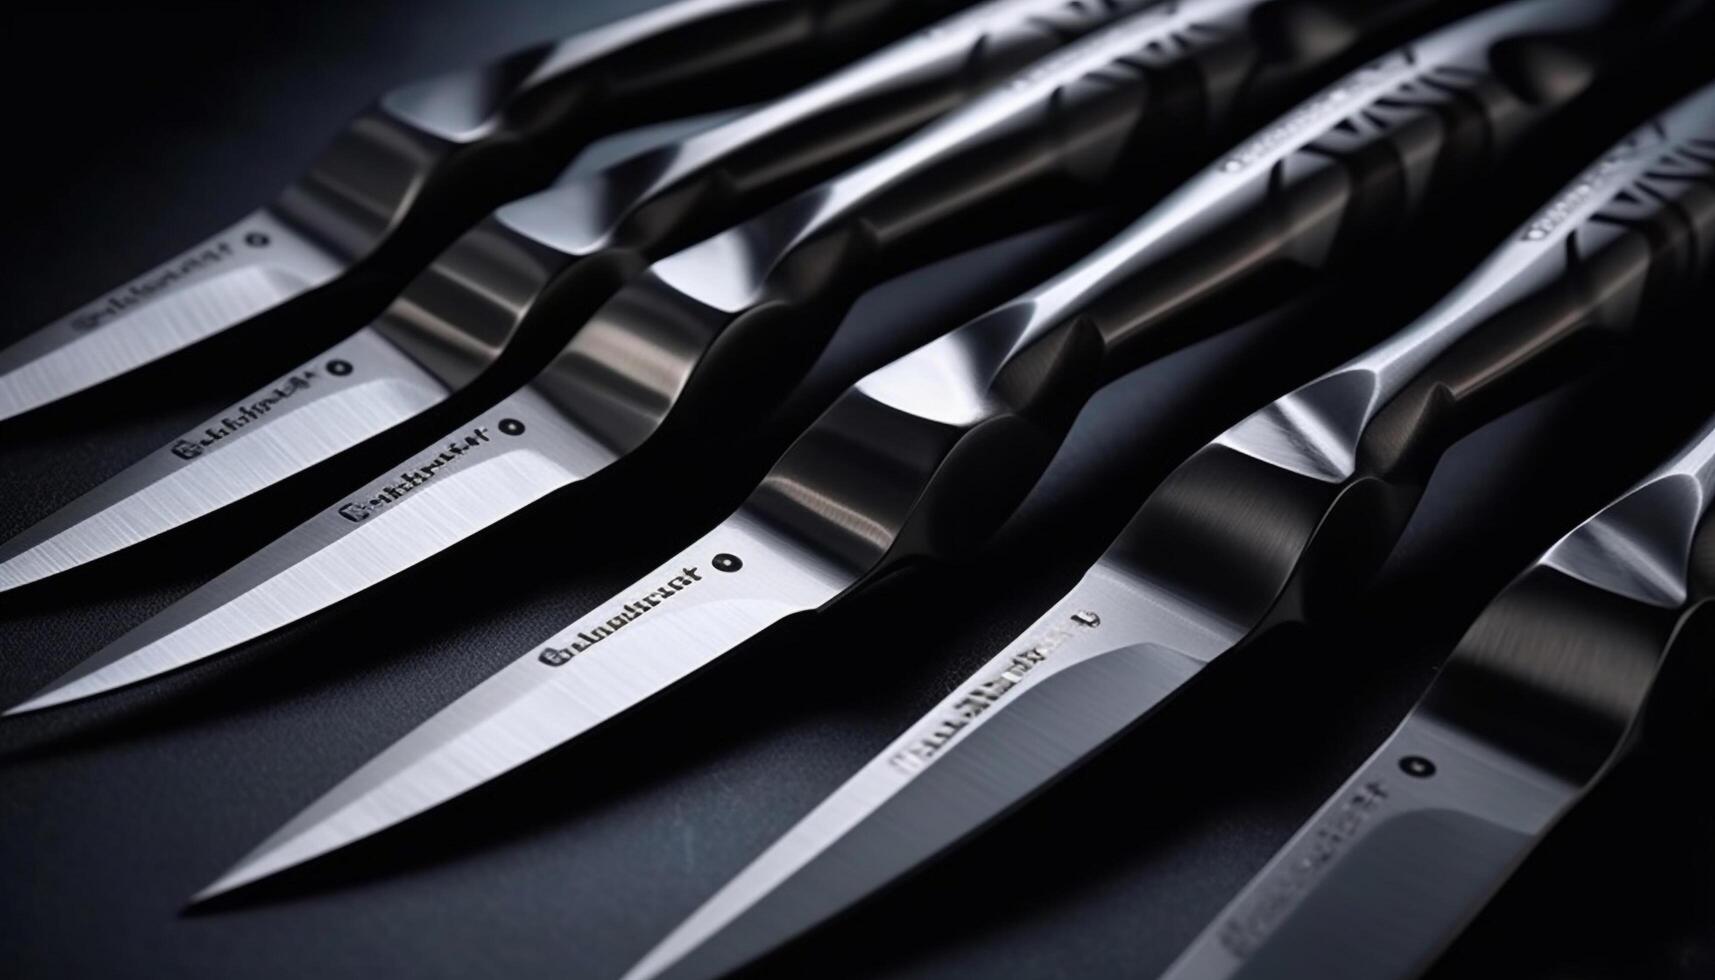 A row of sharp steel blades, metallic work tools collection generated by AI photo